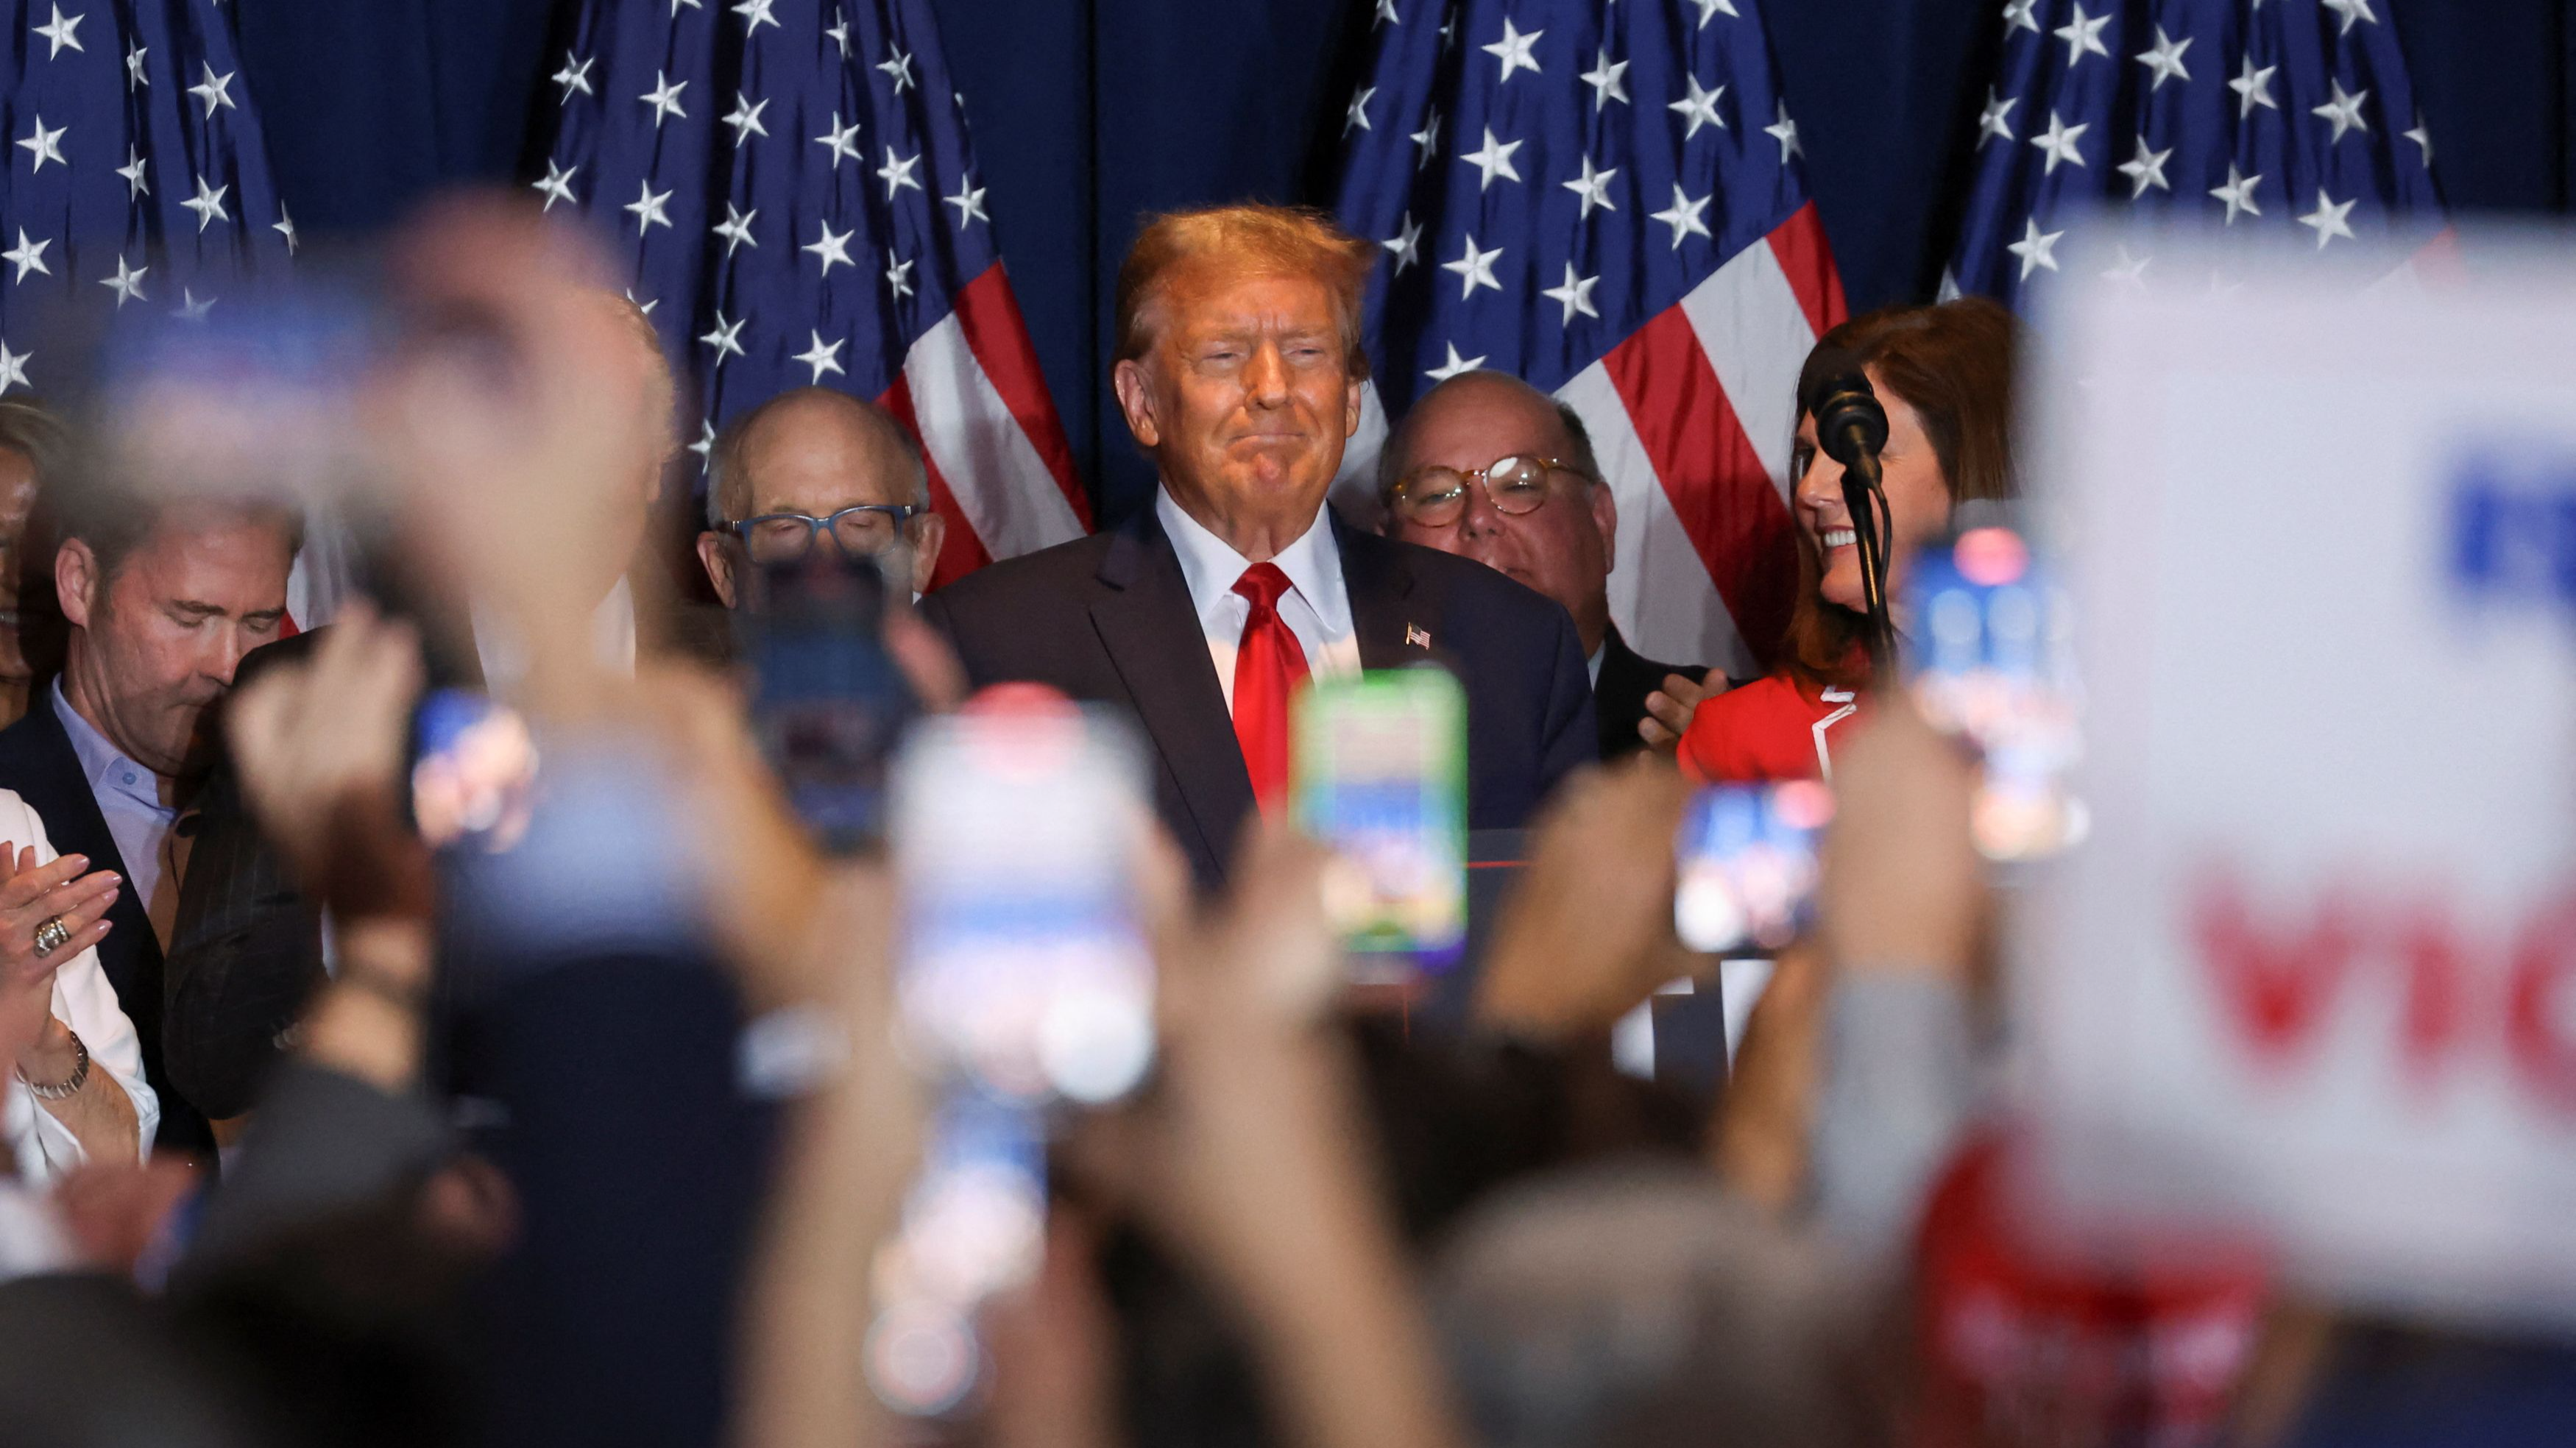 Republican presidential candidate and former U.S. President Donald Trump stands on stage as he hosts a South Carolina Republican presidential primary election night party in Columbia, South Carolina, U.S. February 24, 2024. /Reuters